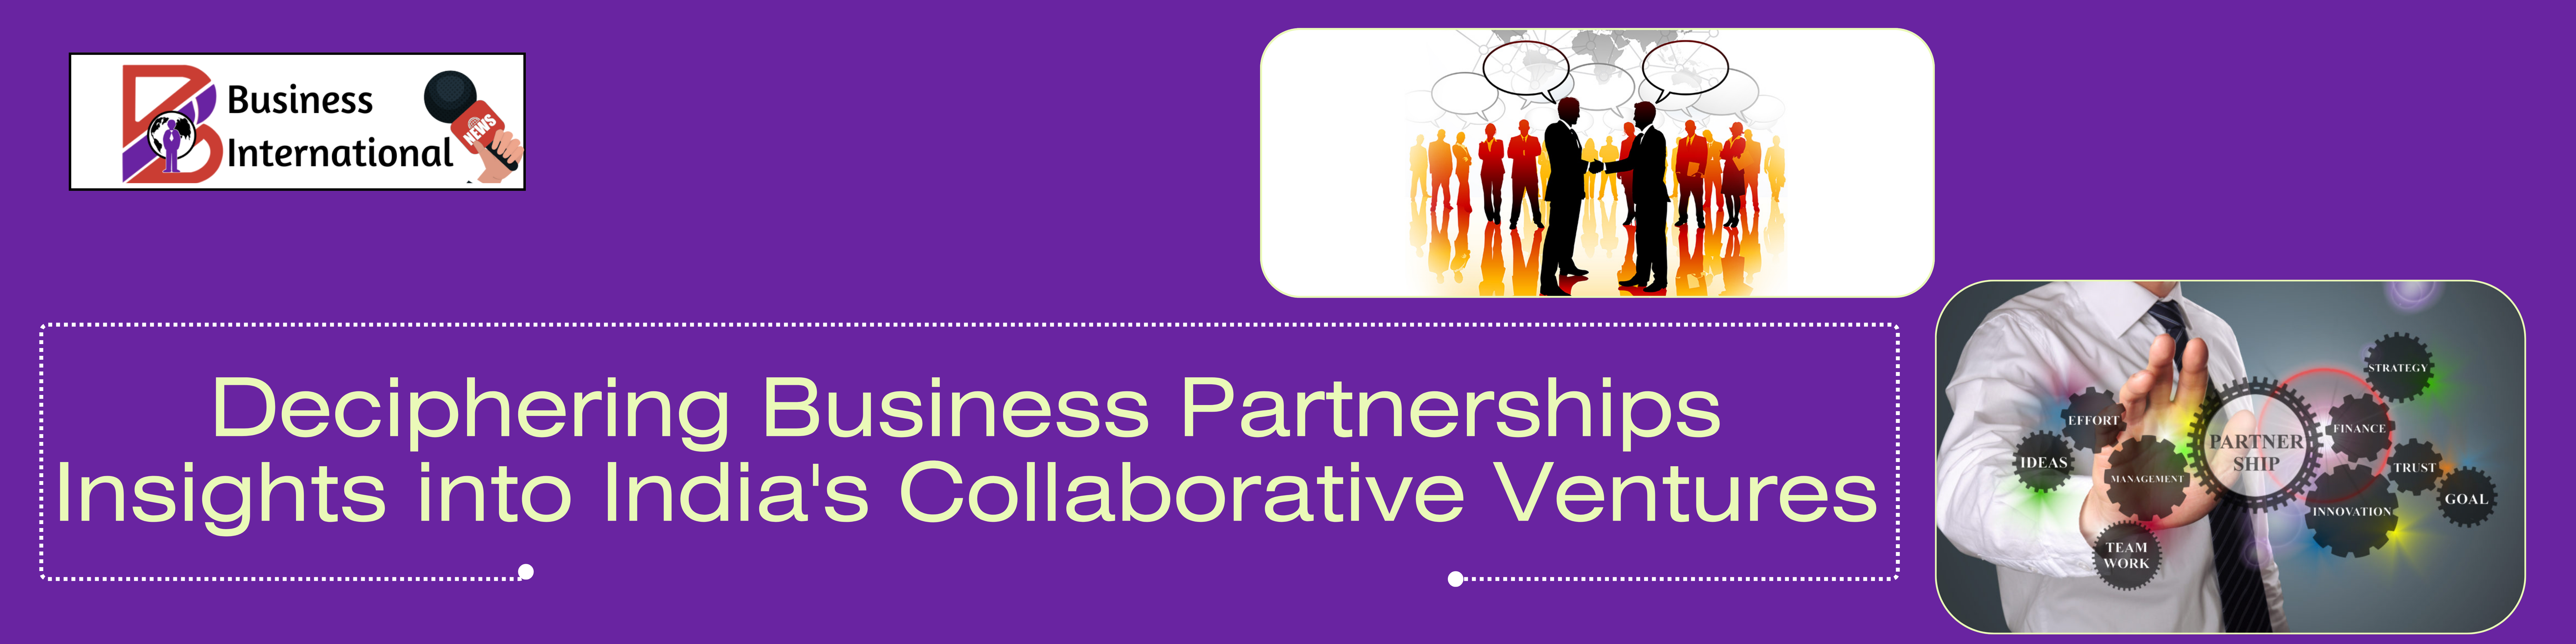 Deciphering Business Partnerships Insights into India's Collaborative Ventures